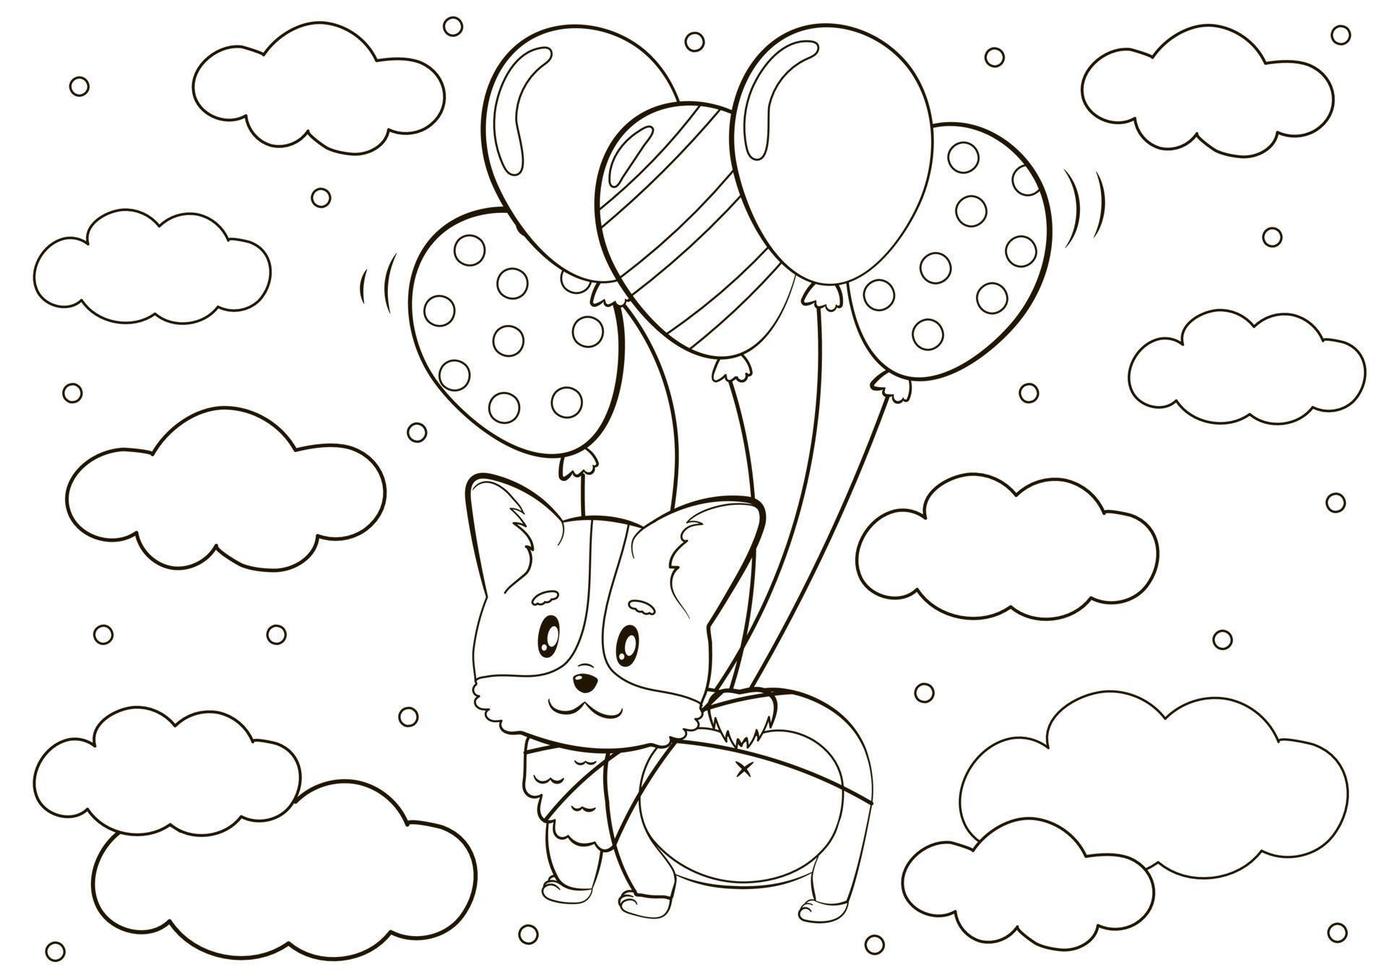 Cute coloring page with cute corgi puppy character floating tied to heart balloons vector